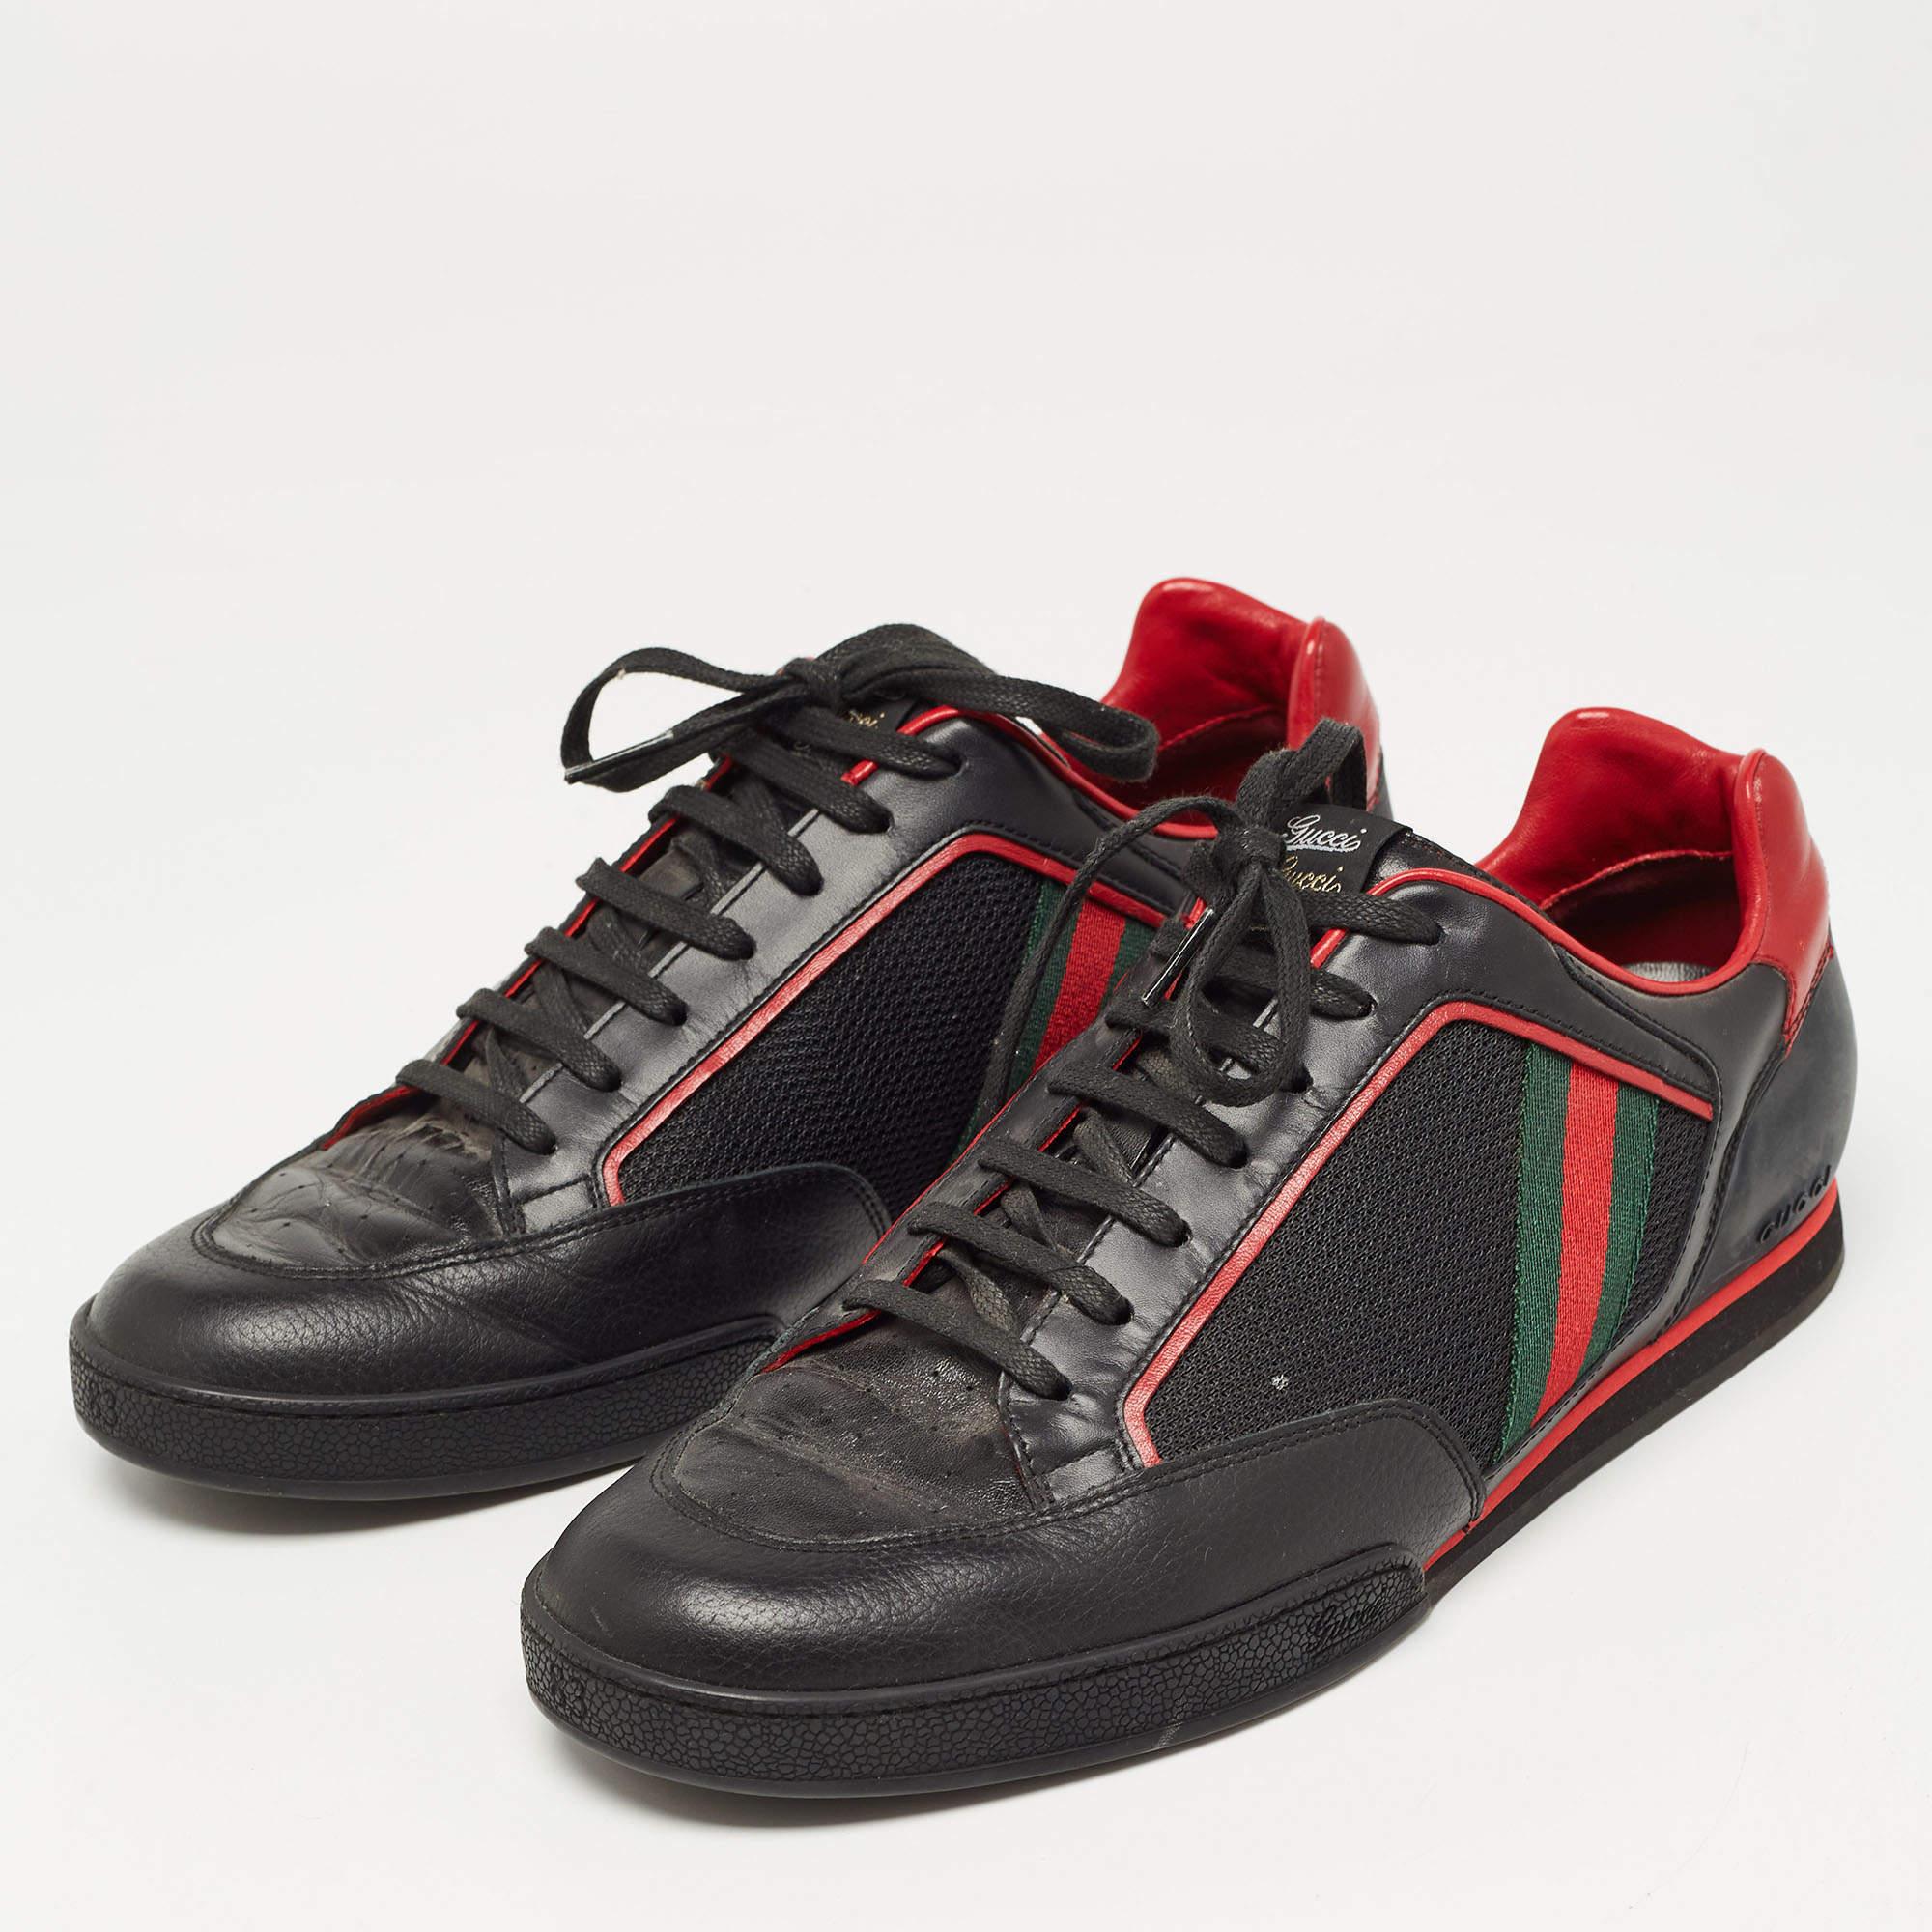 Gucci Black/Red Leather and Mesh Vintage Tennis Sneakers Size 43.5 For Sale 2